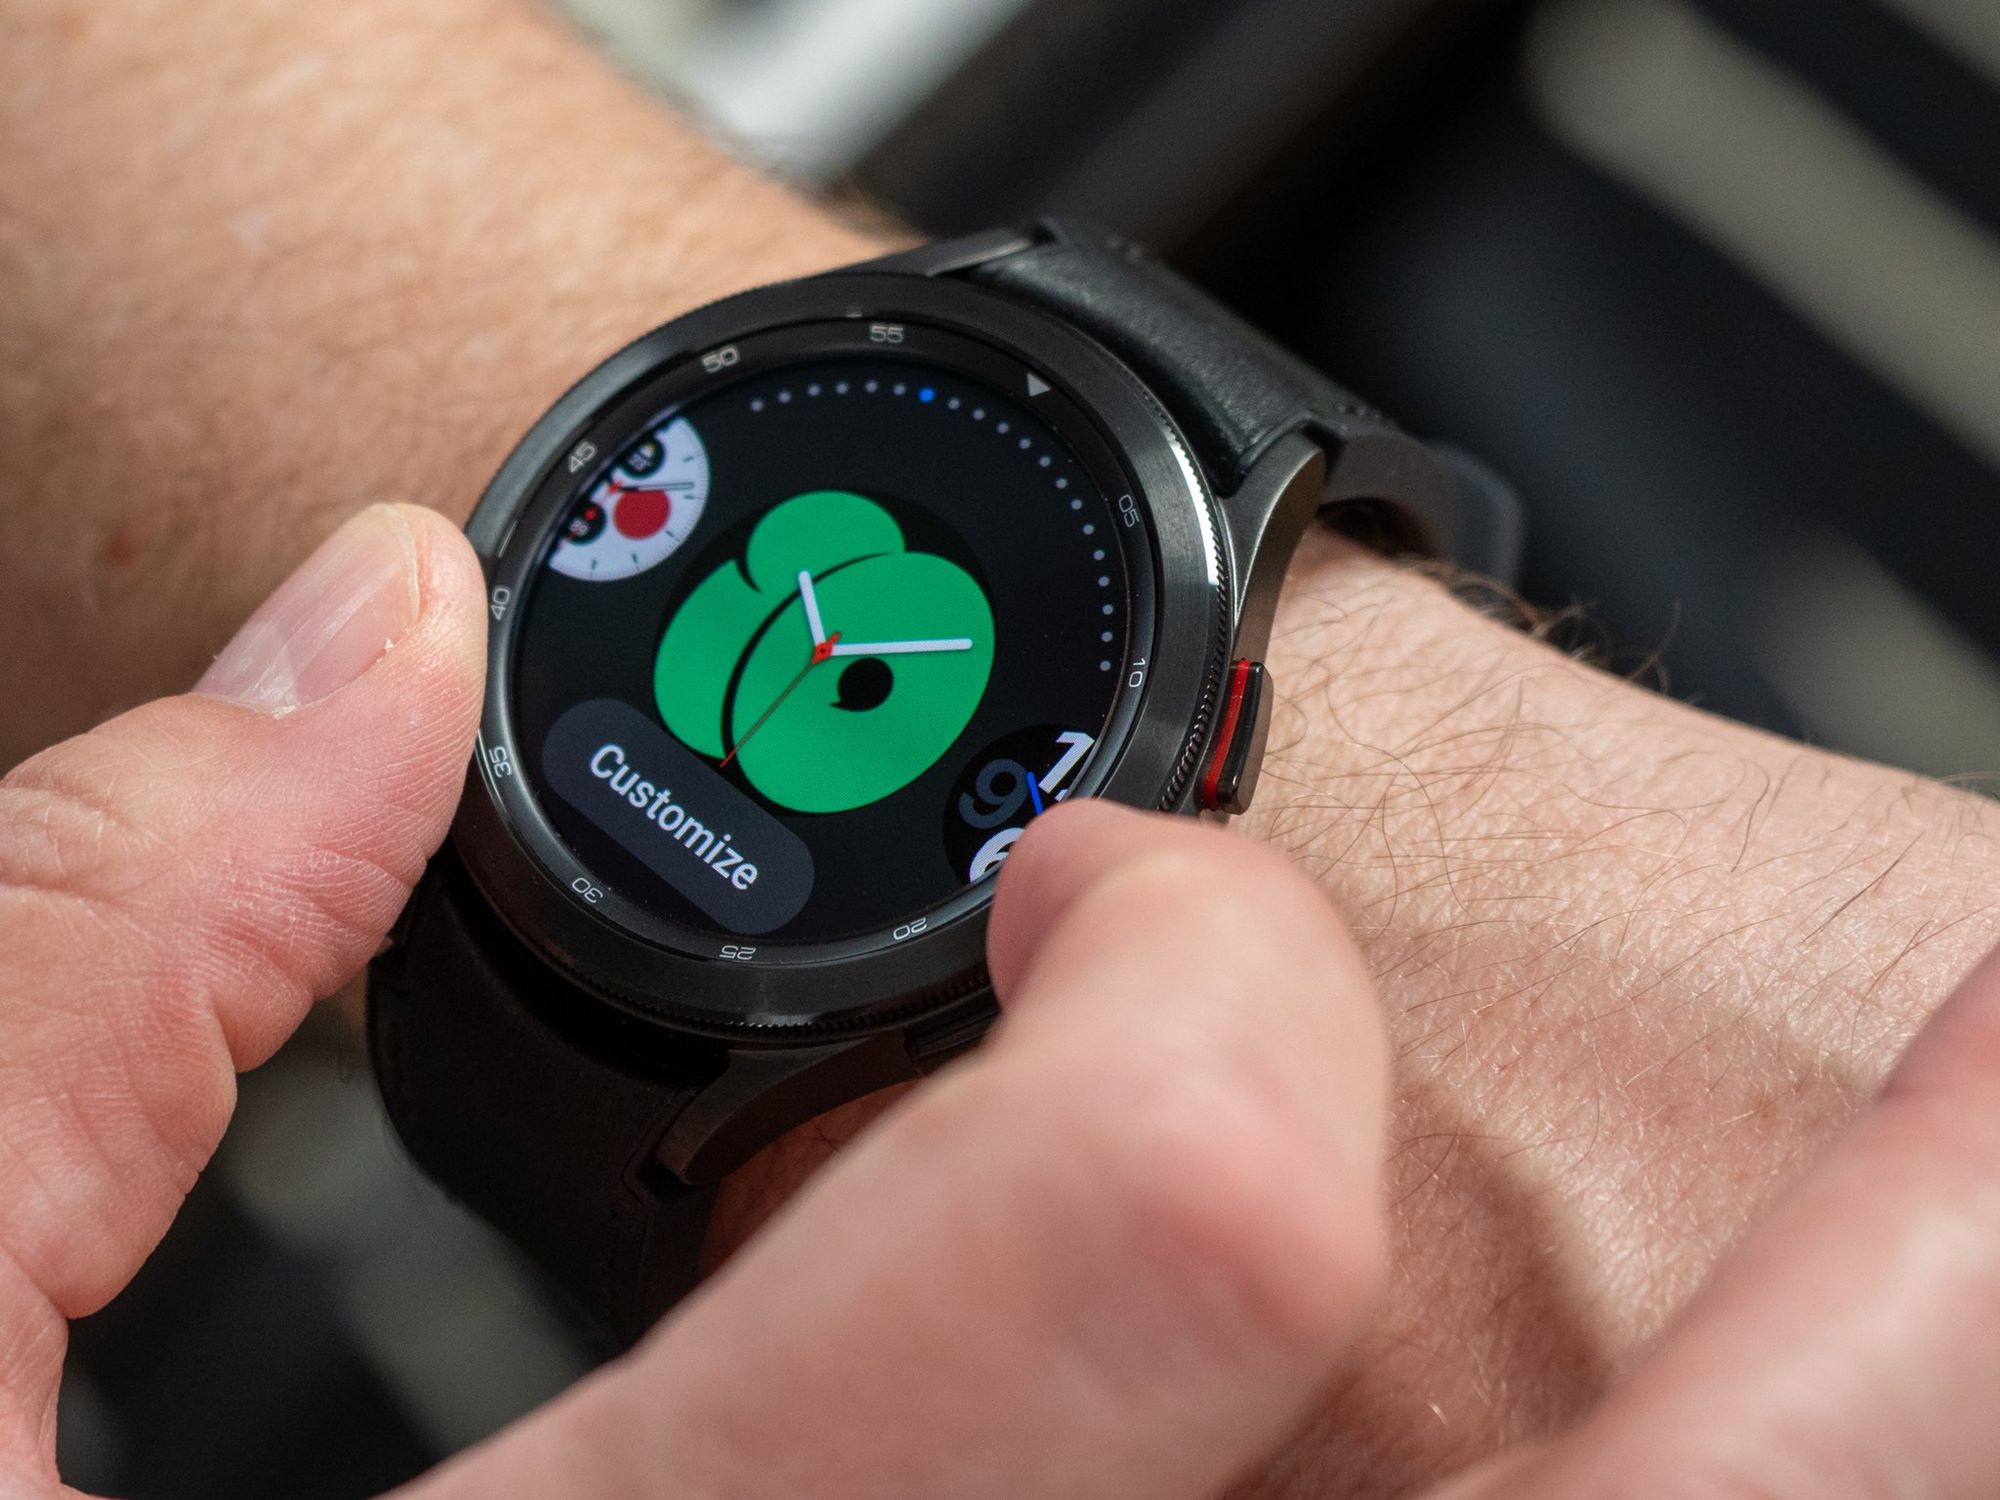 How To Change Time On Galaxy Watch